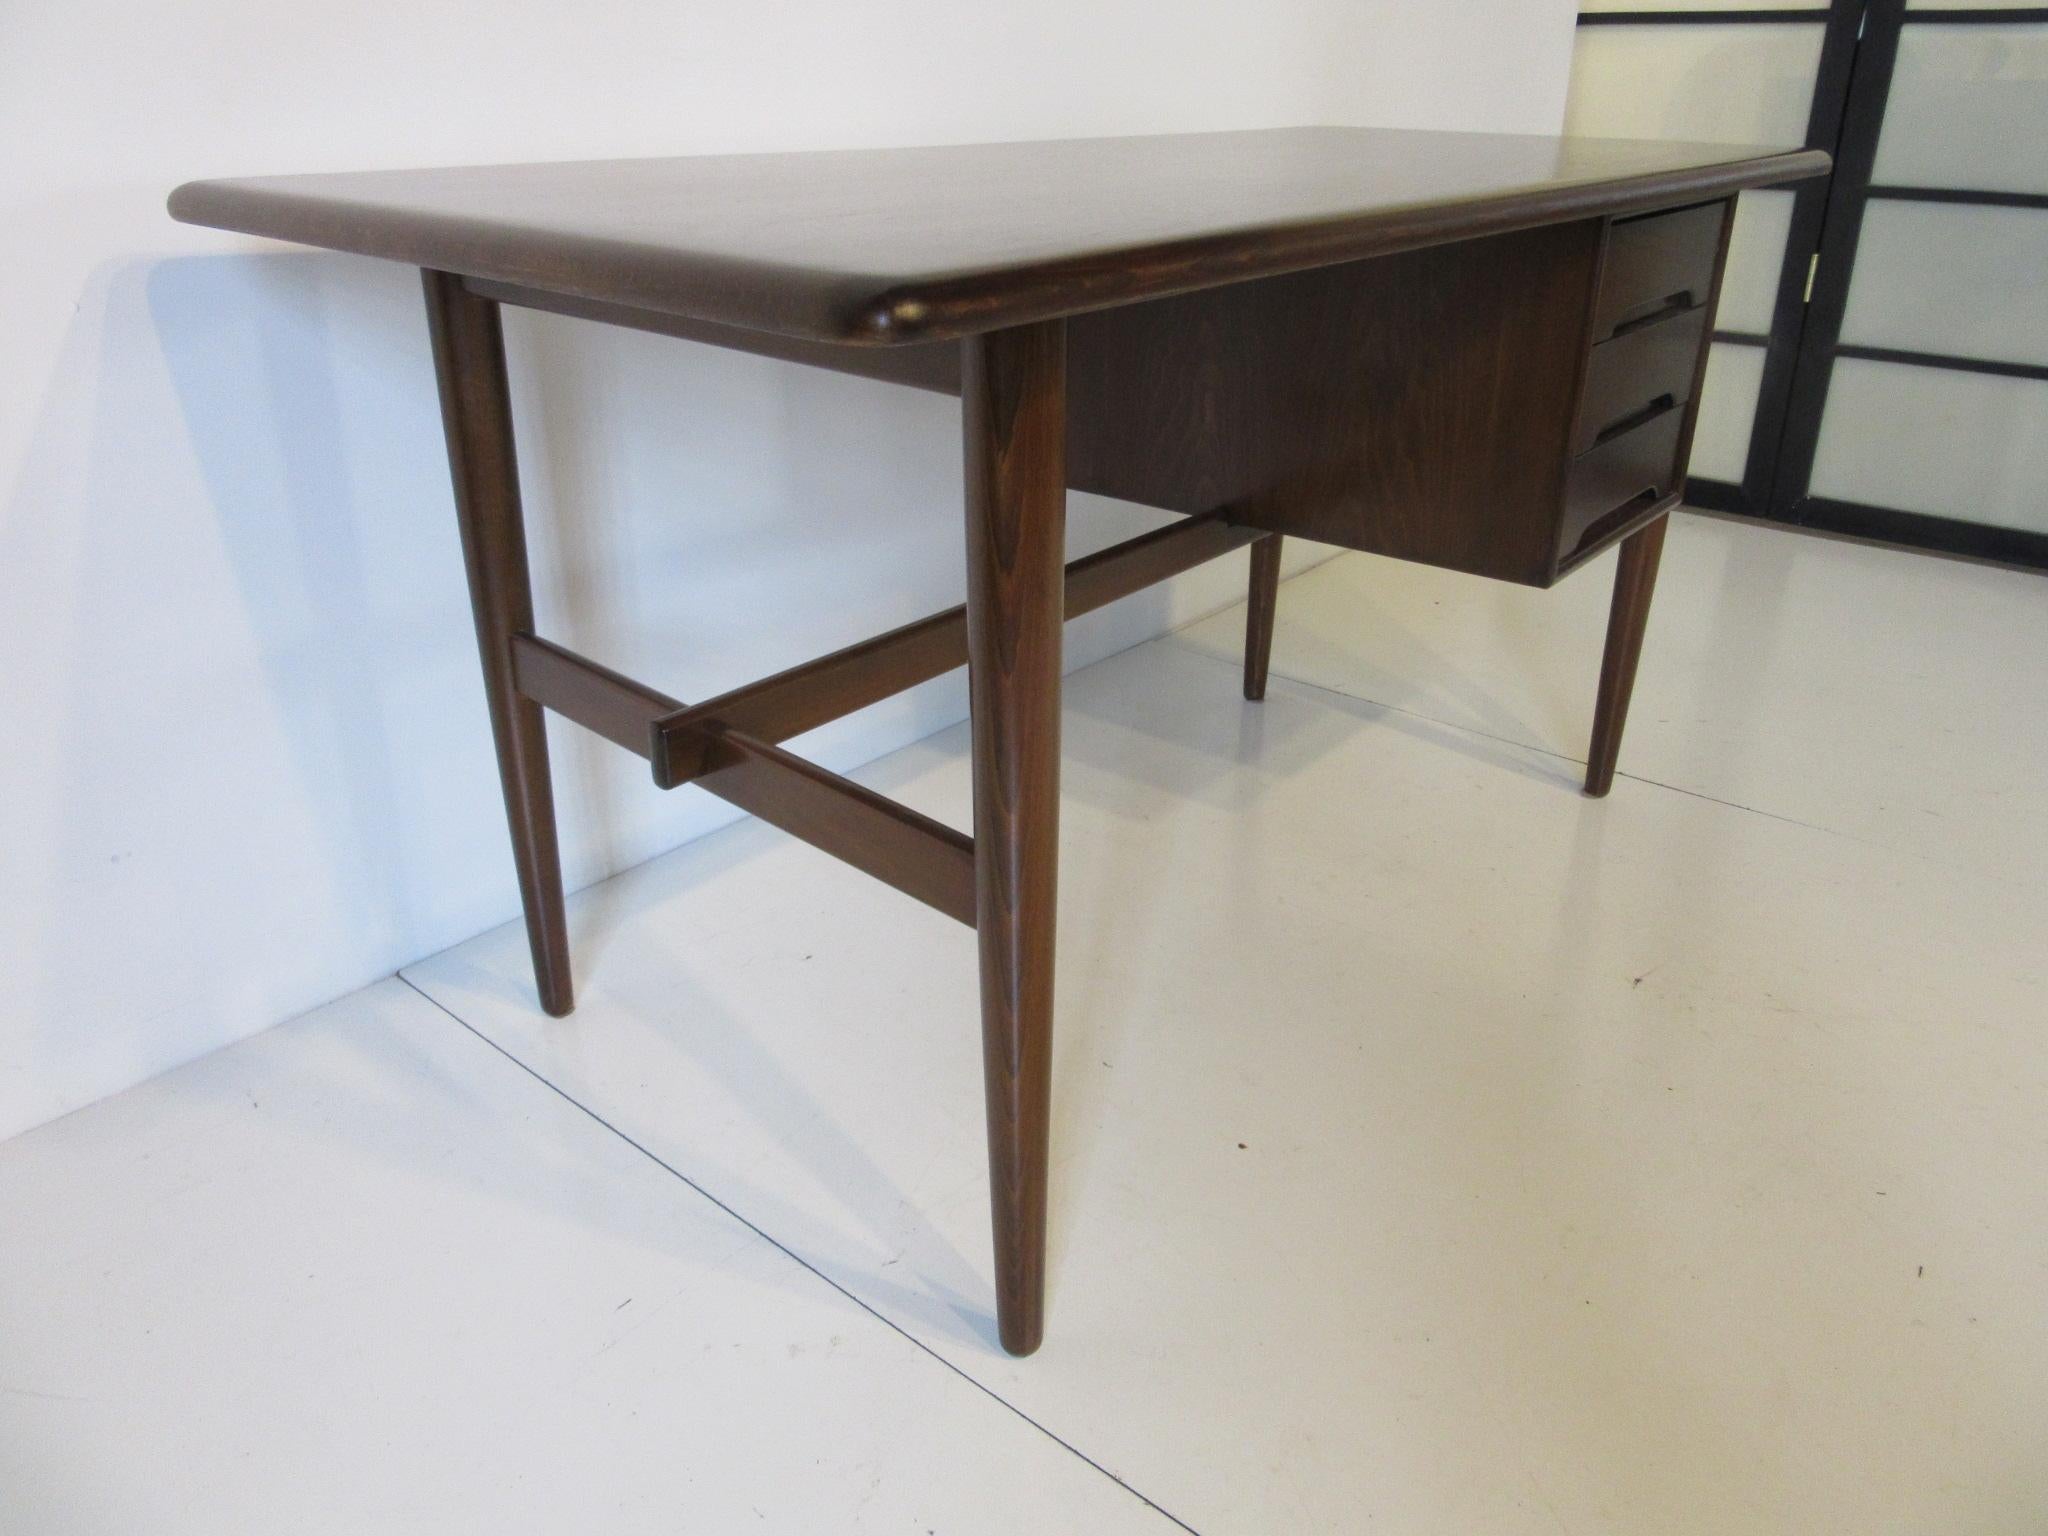 A dark Danish desk with angled top, three drawers to one side and cross stretcher to the lower portion for design detail and support. Branded mark to the bottom of the desk Made in Denmark, measurement for the angled desk top is 25